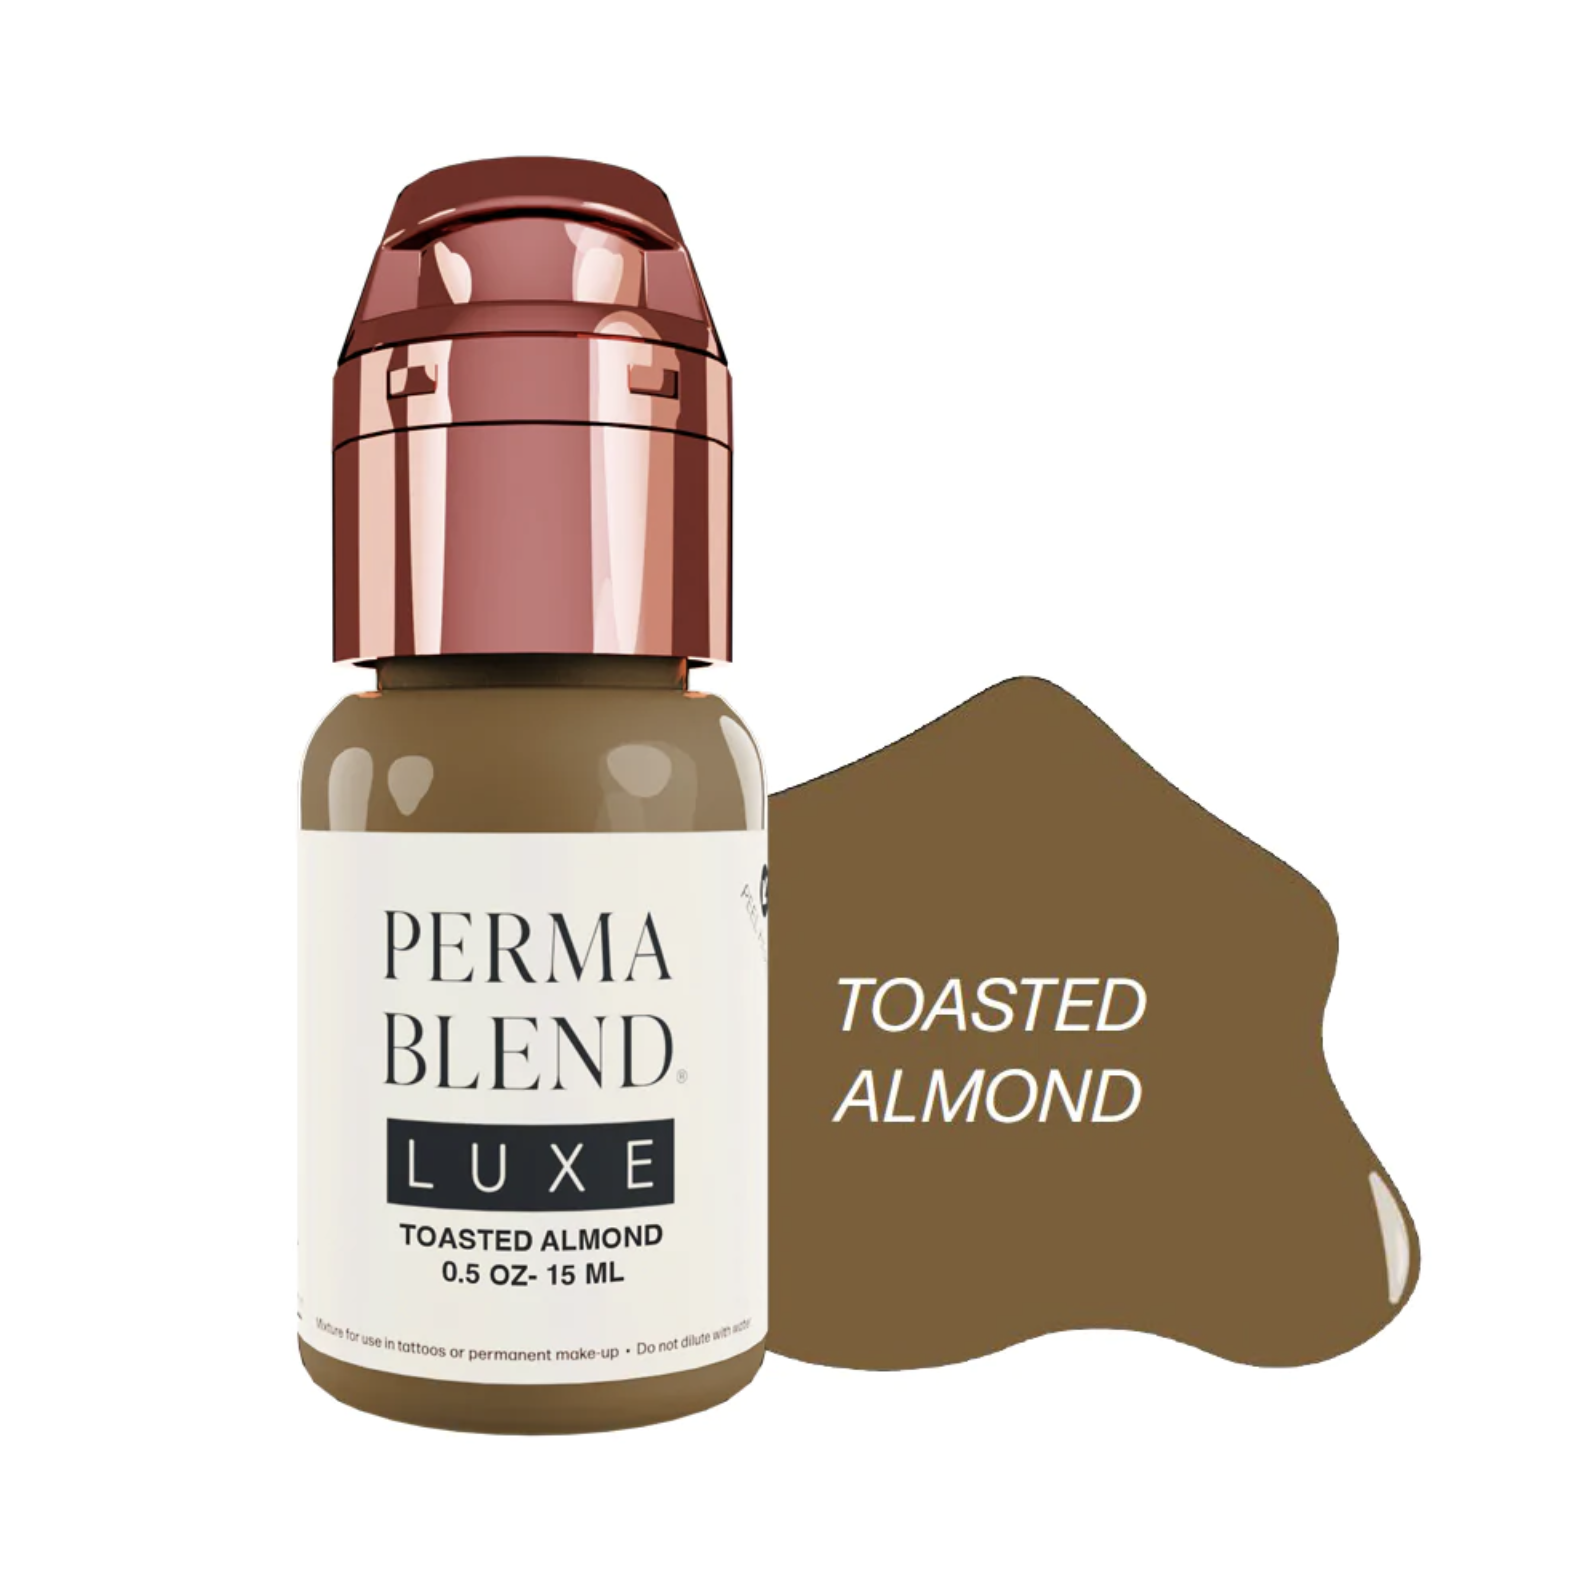 Perma Blend LUXE - Toasted Almond - 15ml - Dasha Tattoo Supply